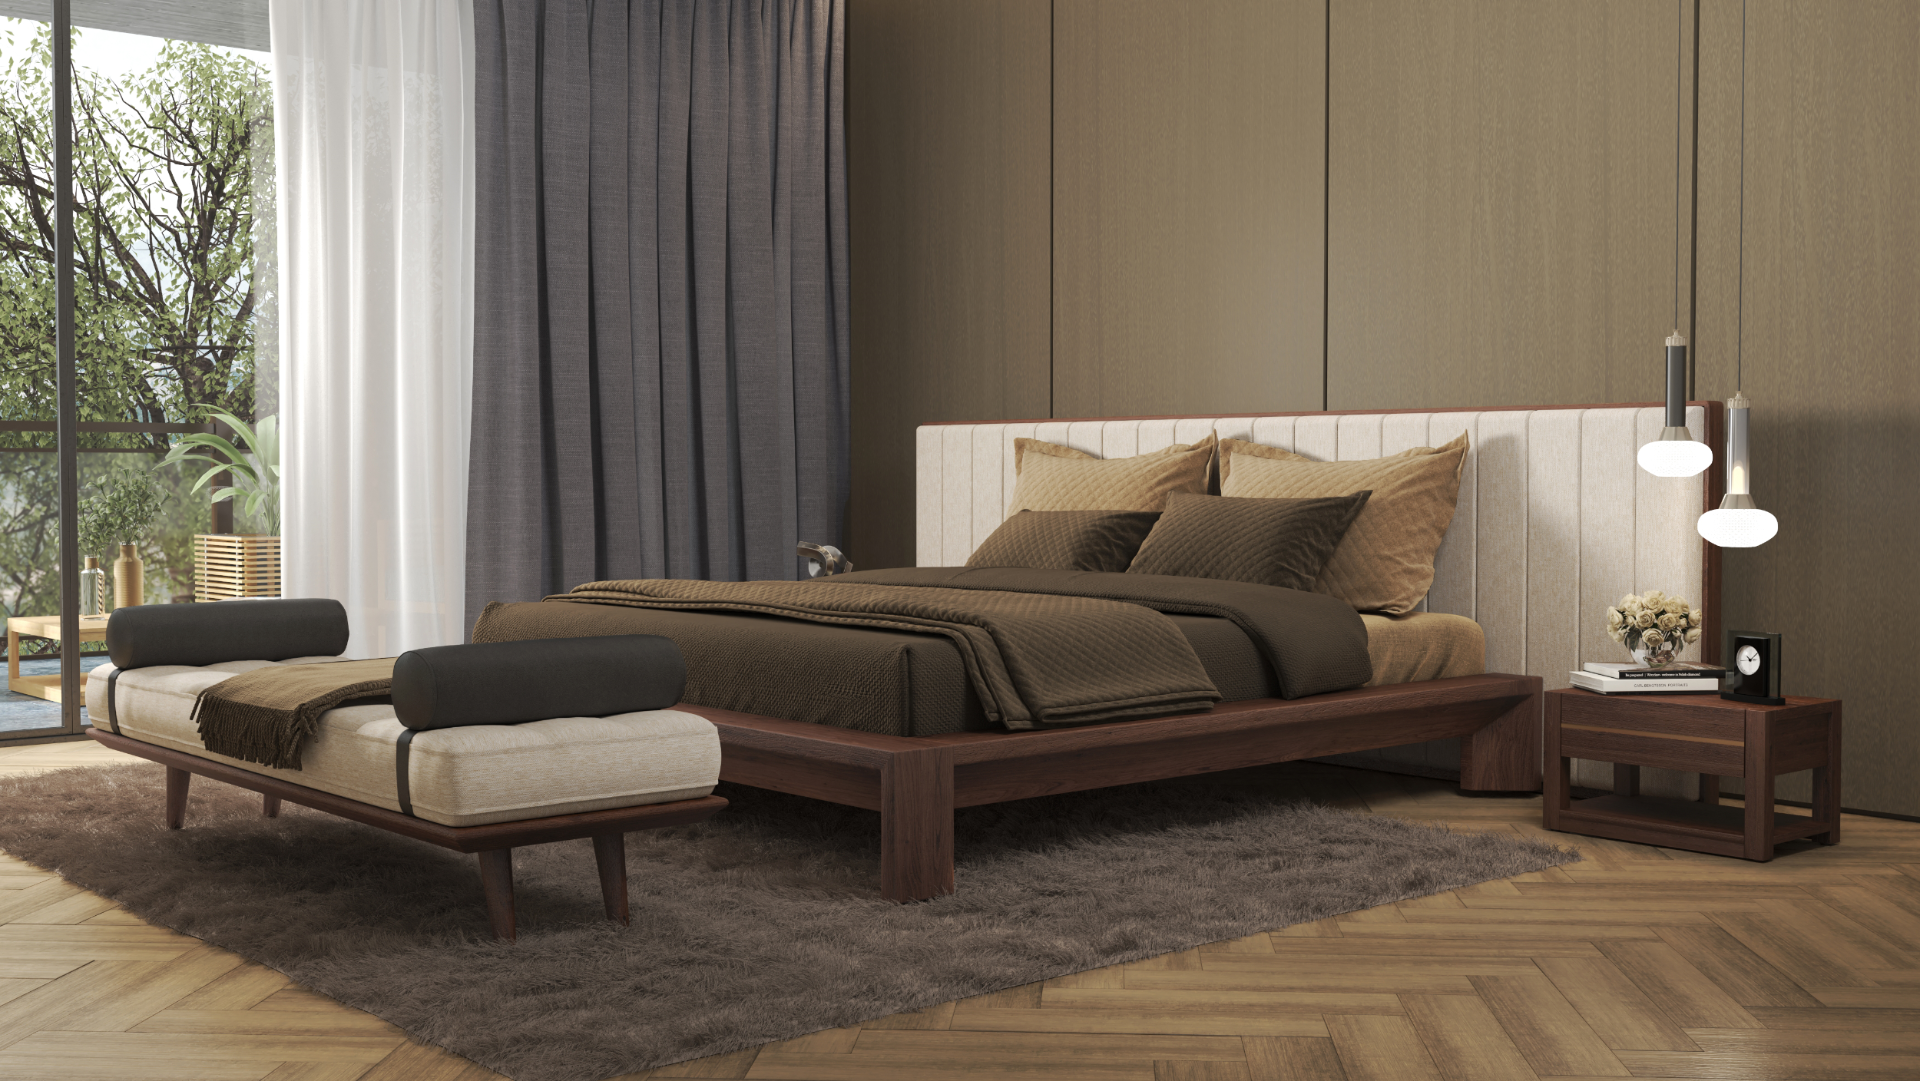 Which Teak Furniture For Your Bedroom 